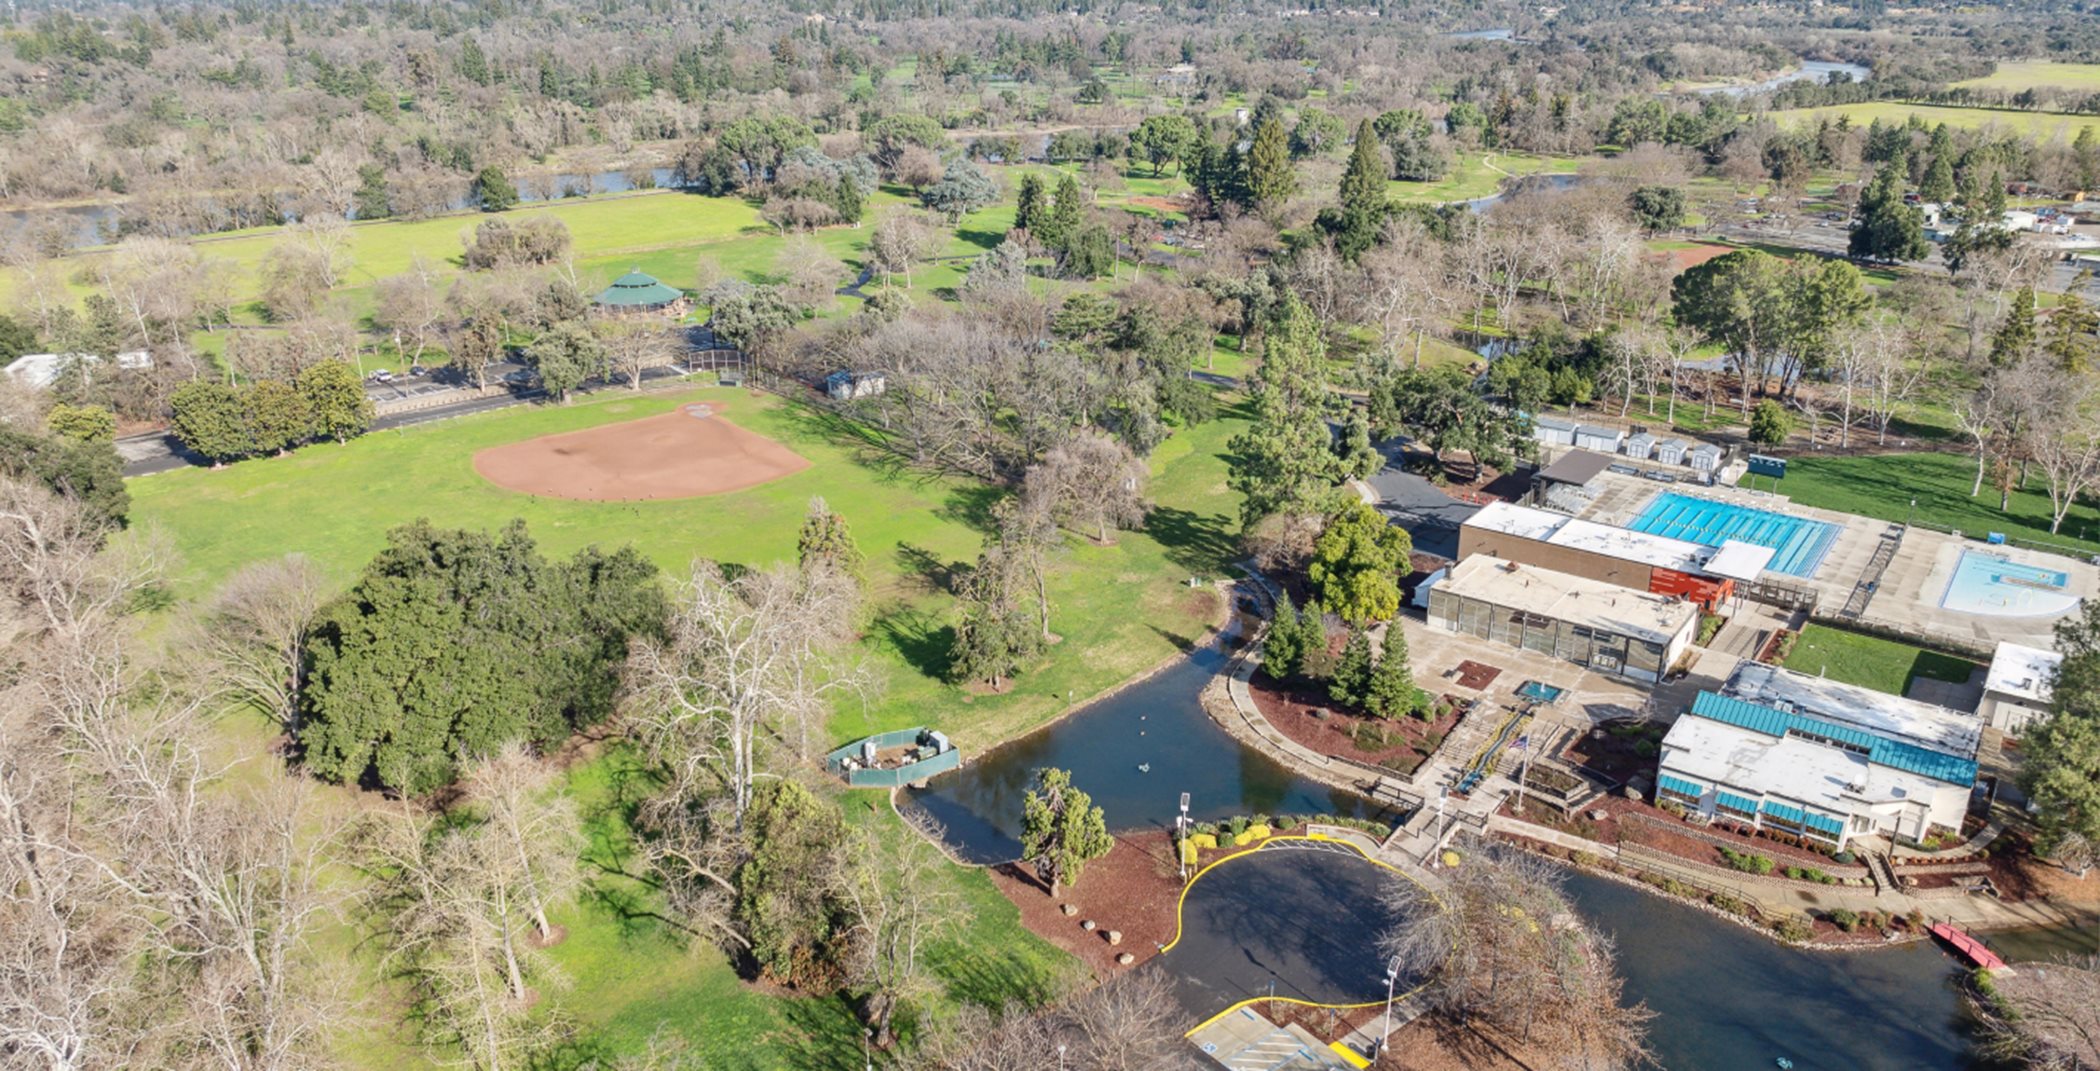 Hagan community park aerial showing the baseball field and other recreational buildings